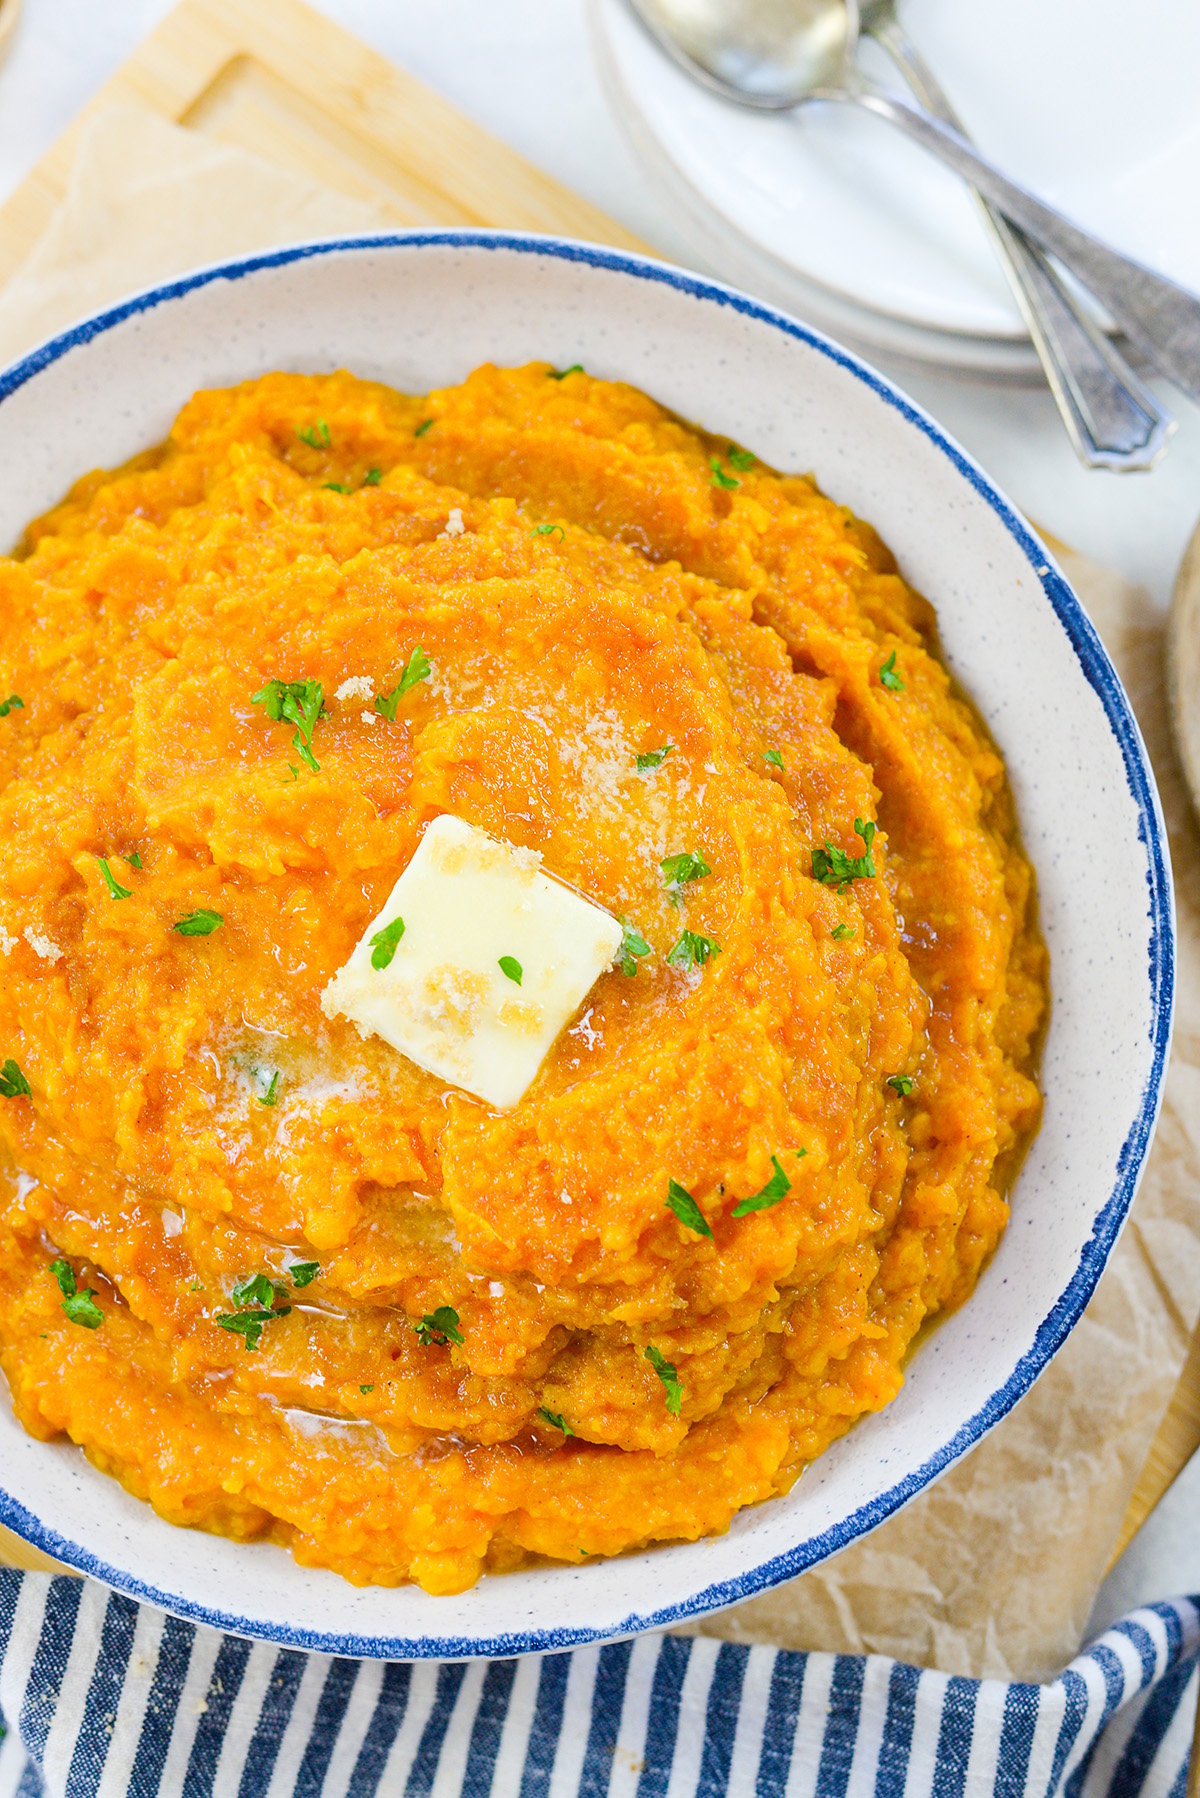 Mashed sweet potatoes in bowl with butter on top.